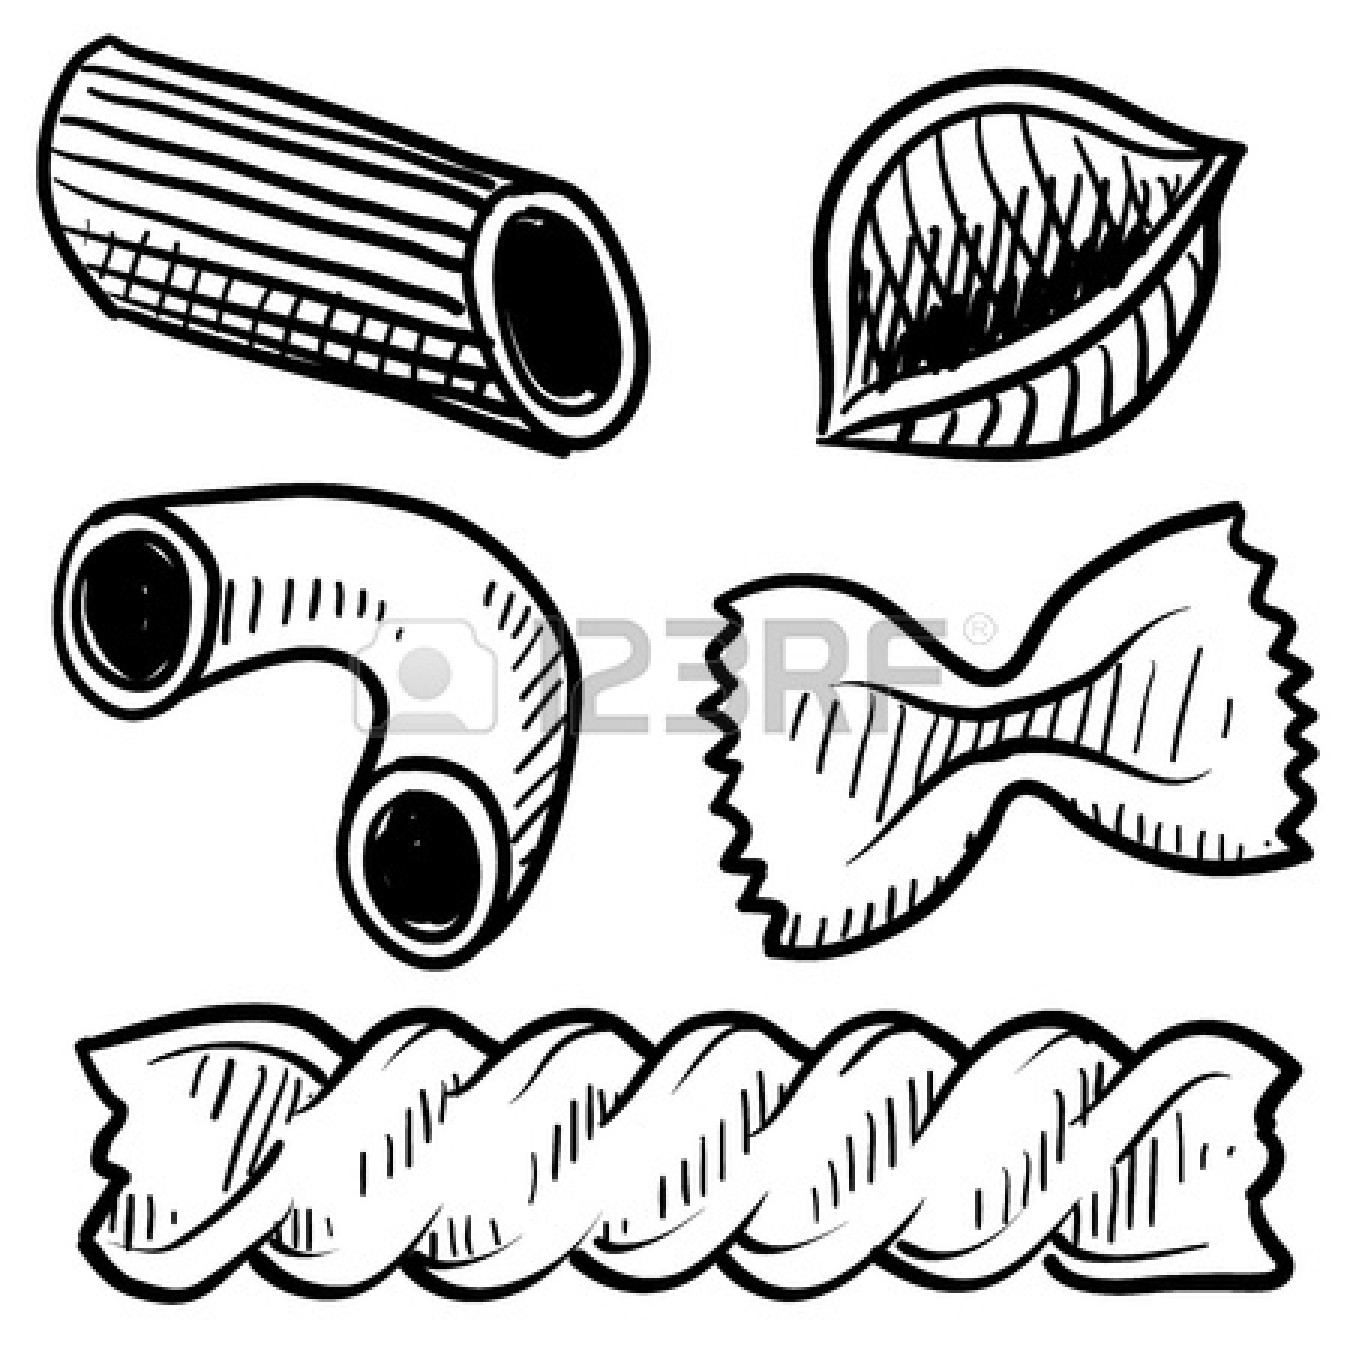 Pasta Clipart Black And White   Clipart Panda   Free Clipart Images